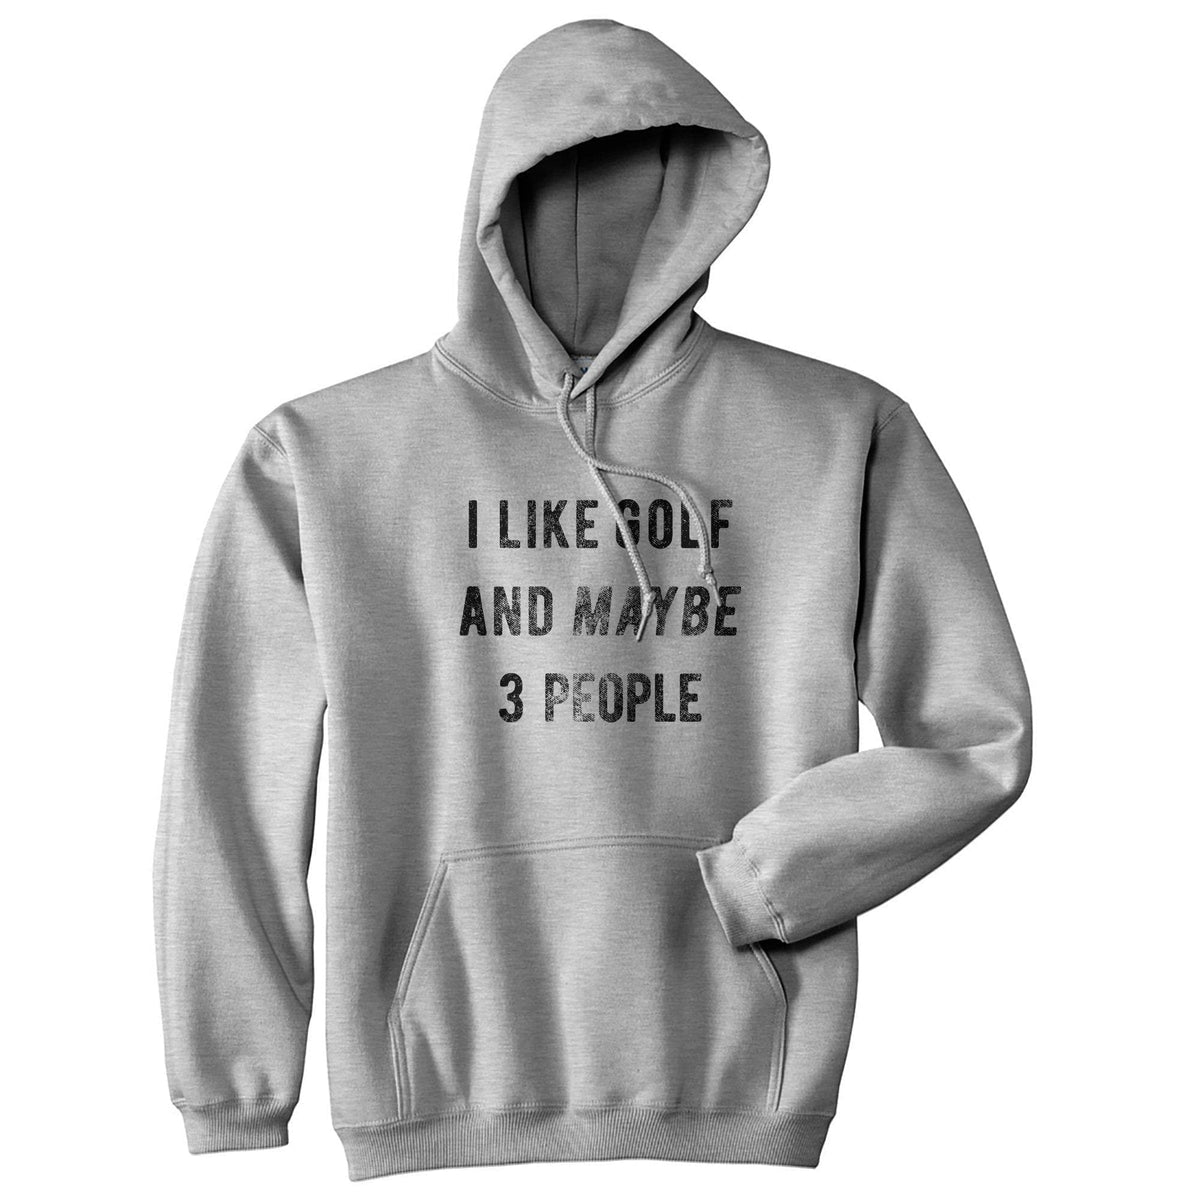 I Like Golf And Maybe 3 People Hoodie - Crazy Dog T-Shirts